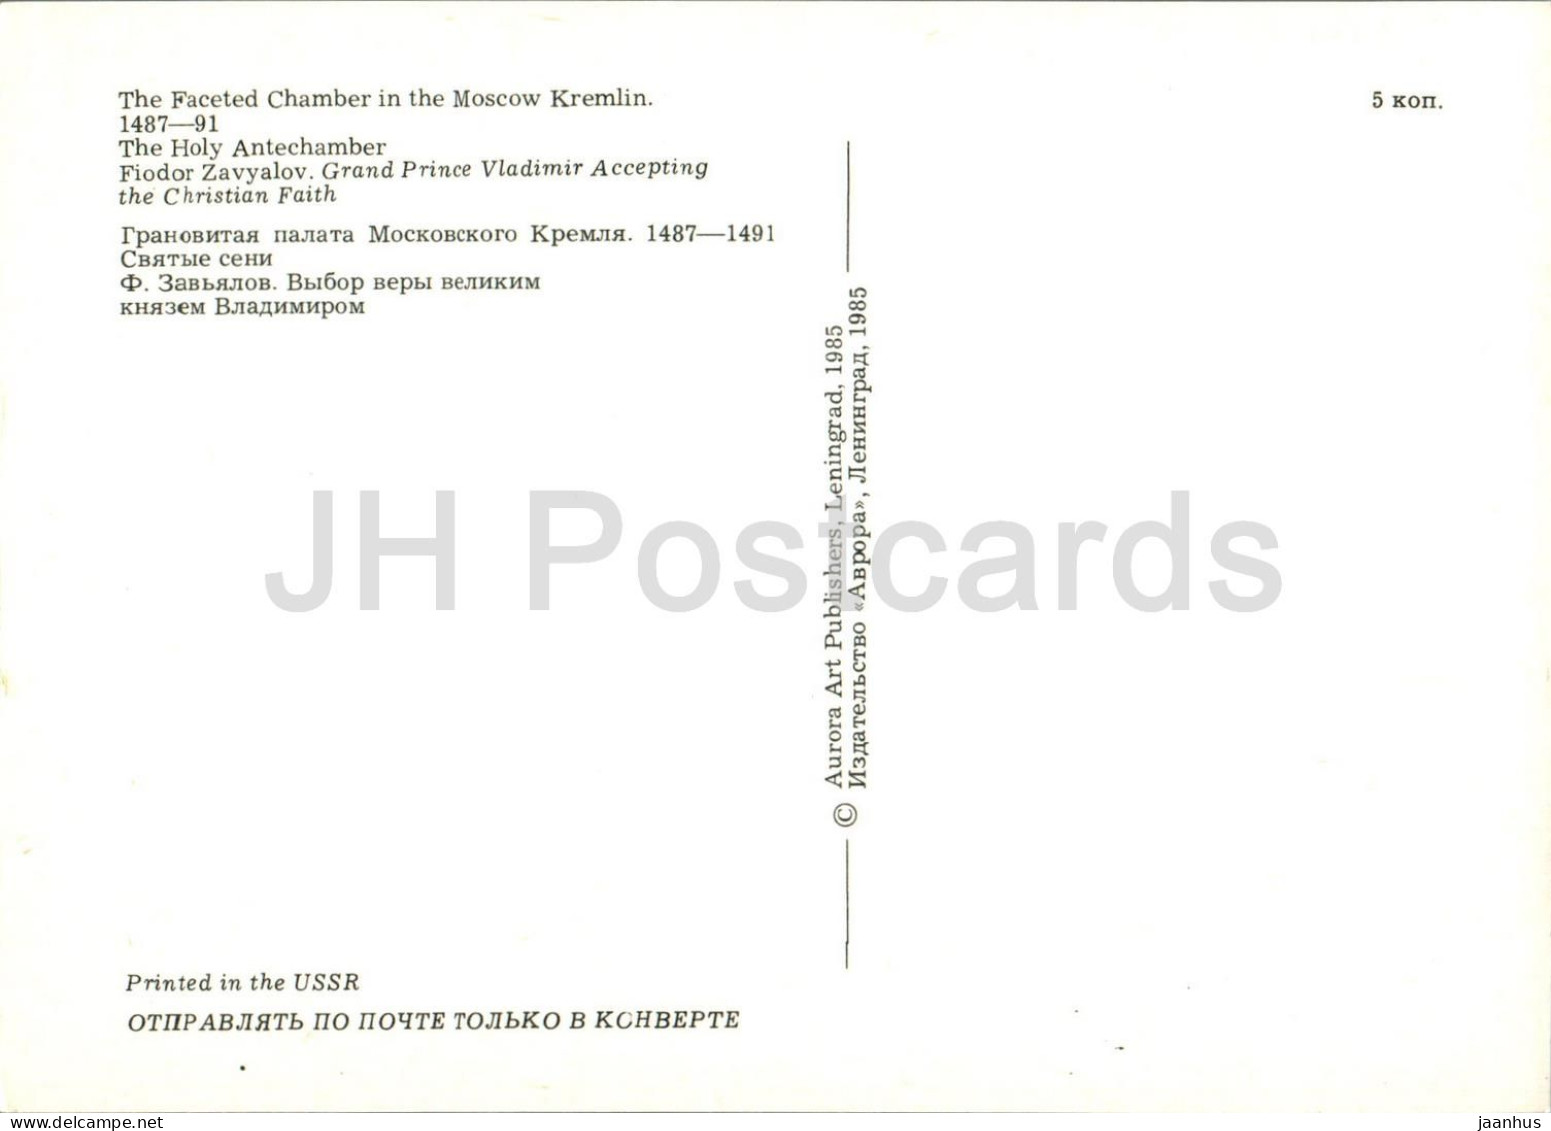 Moscow Kremlin - Faceted Chamber - The Holy Antechamber - Fiodor Zavyalov - Prince - 1985 - Russia USSR - Unused - Russie